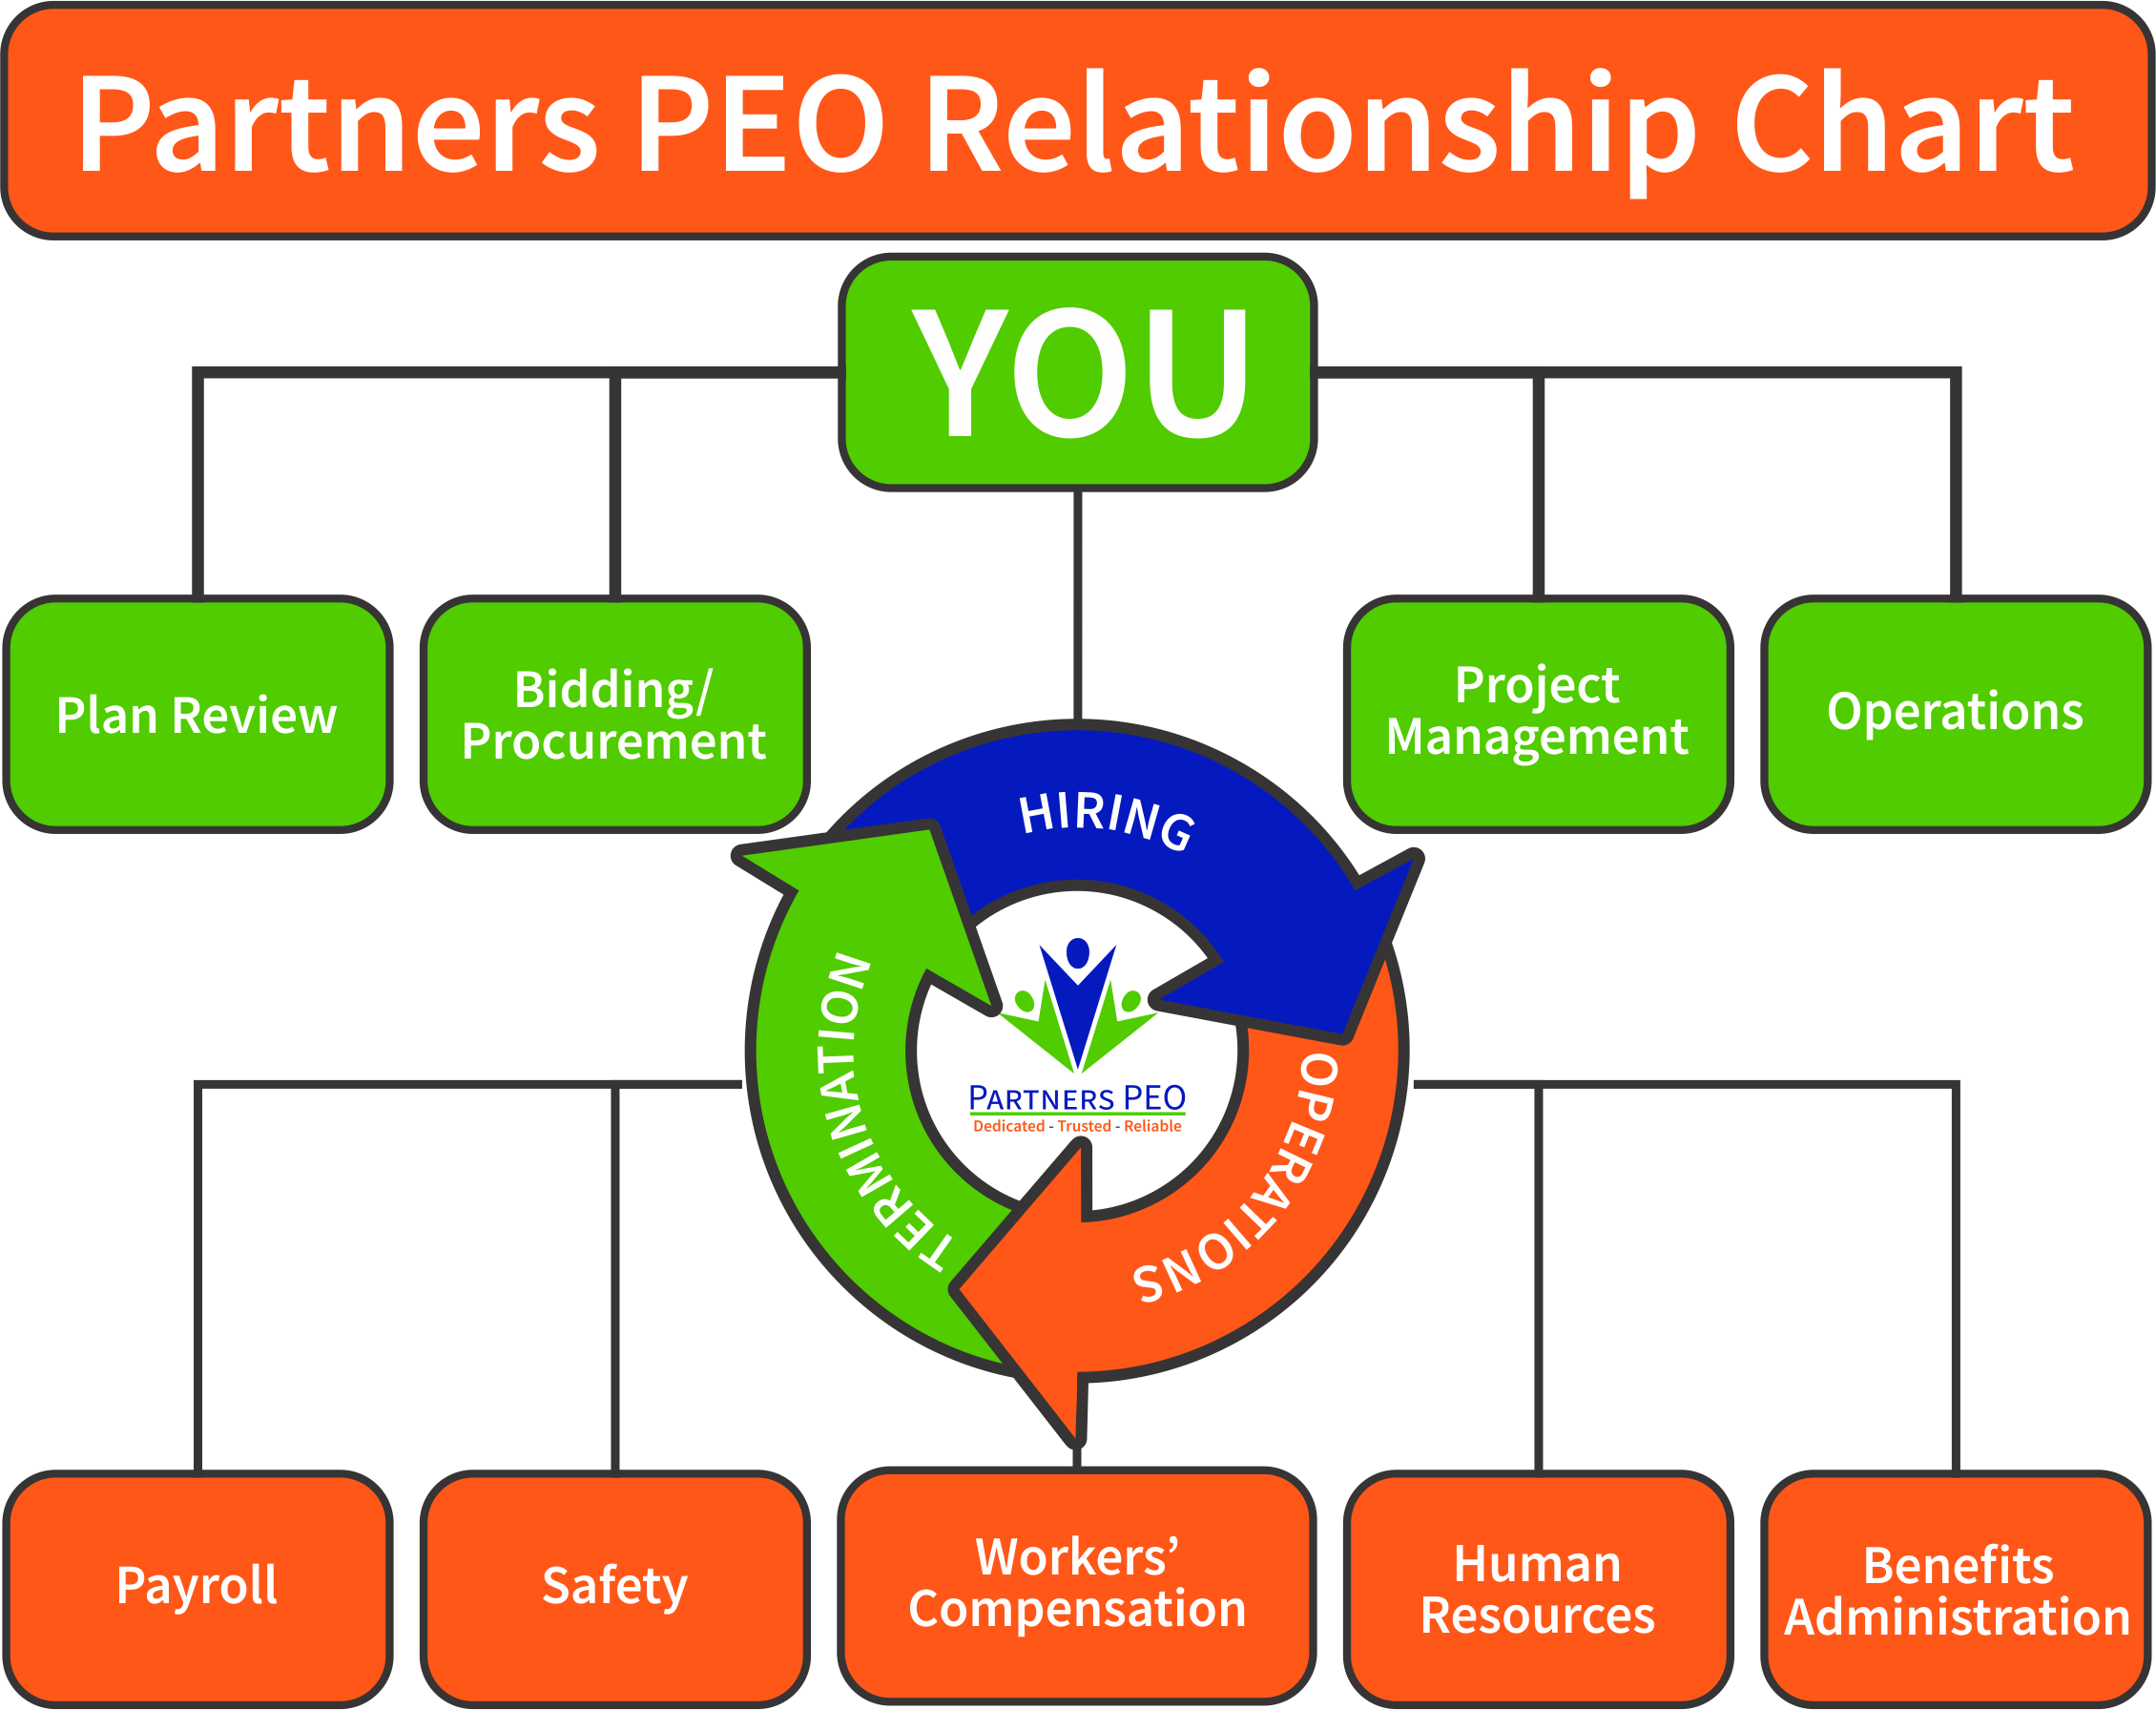 [image of Partners PEO relationship chart]